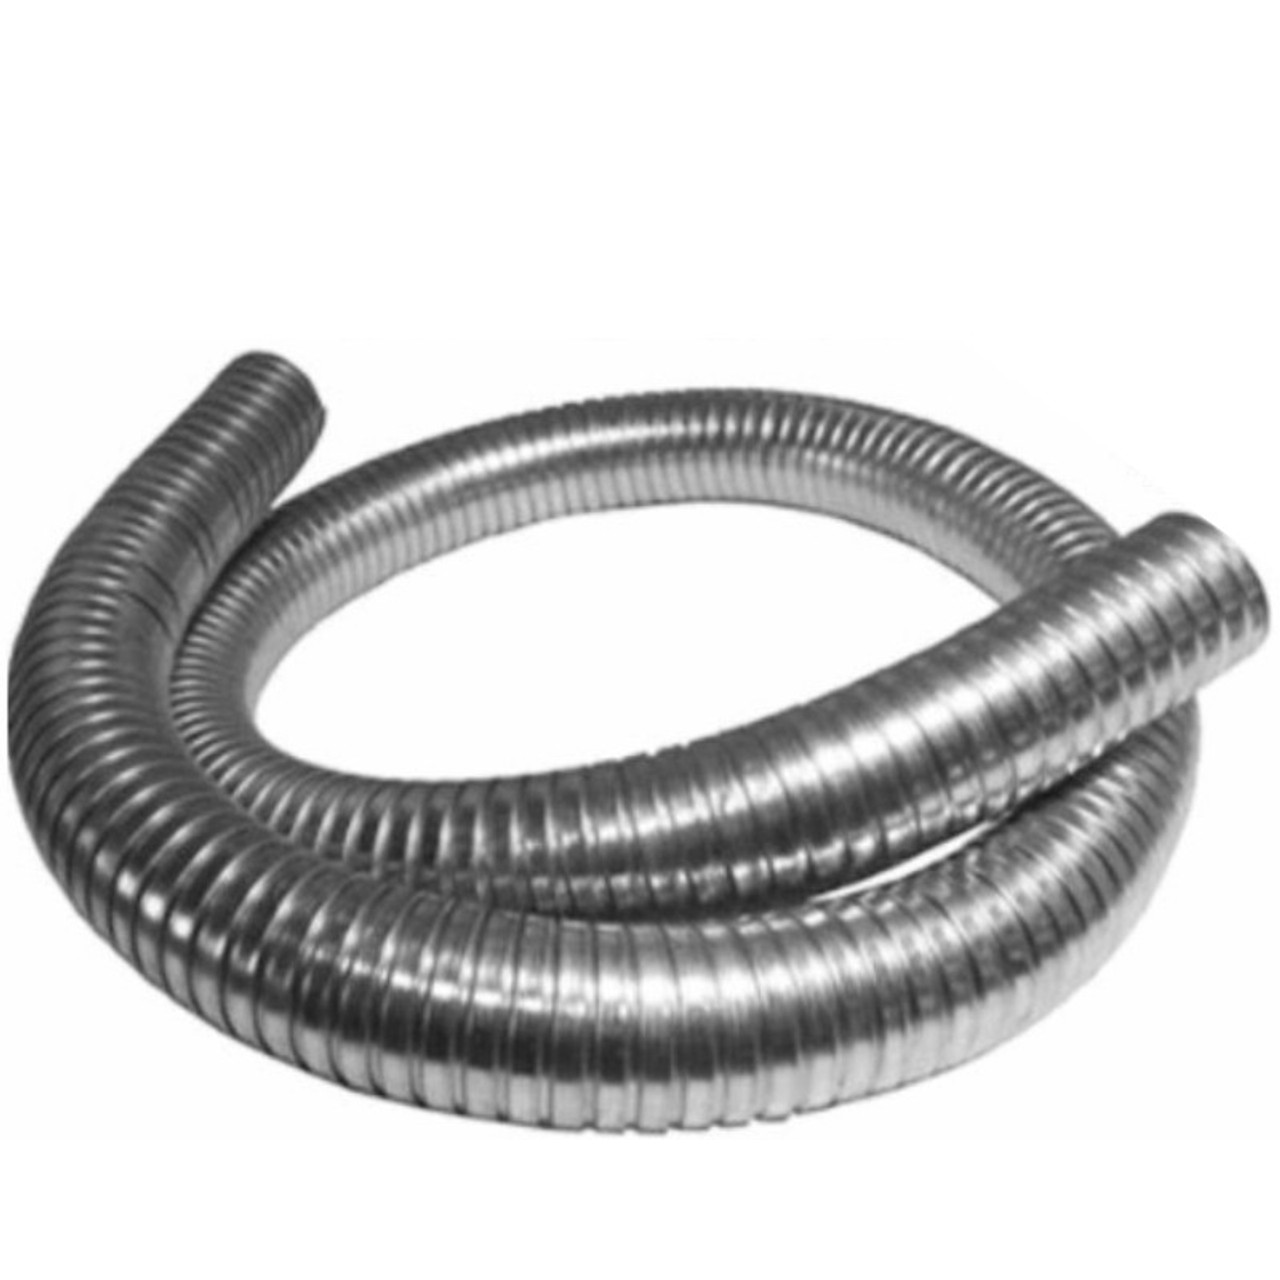 Exhaust Flex Pipe Tube Stainless Steel Double Braid 3 Inch X 6